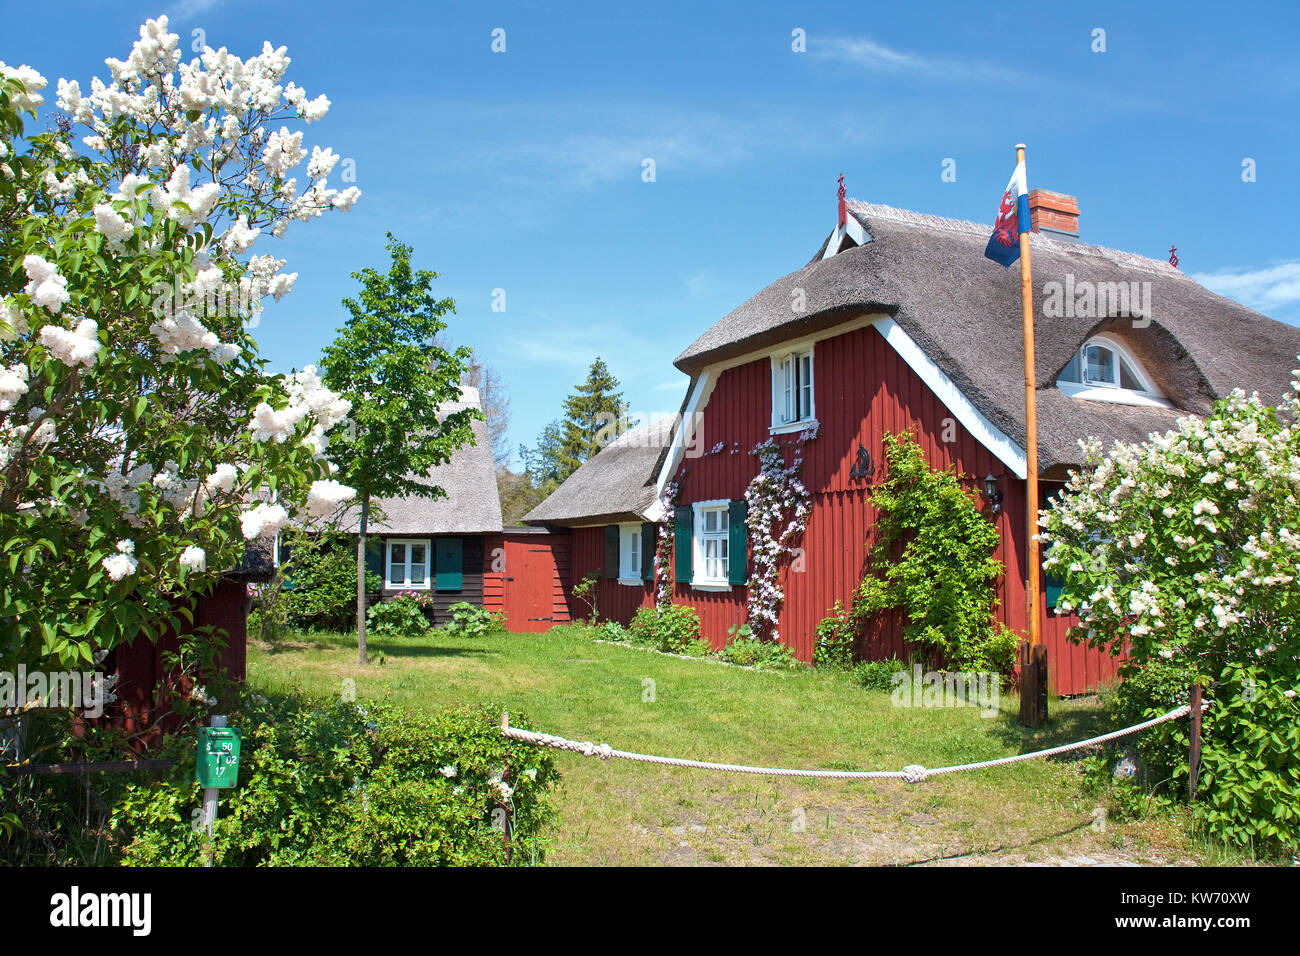 Thatched-roof houses at the village Althagen, Ahrenshoop, Fischland, Mecklenburg-Western Pomerania, Baltic sea, Germany, Europe Stock Photo